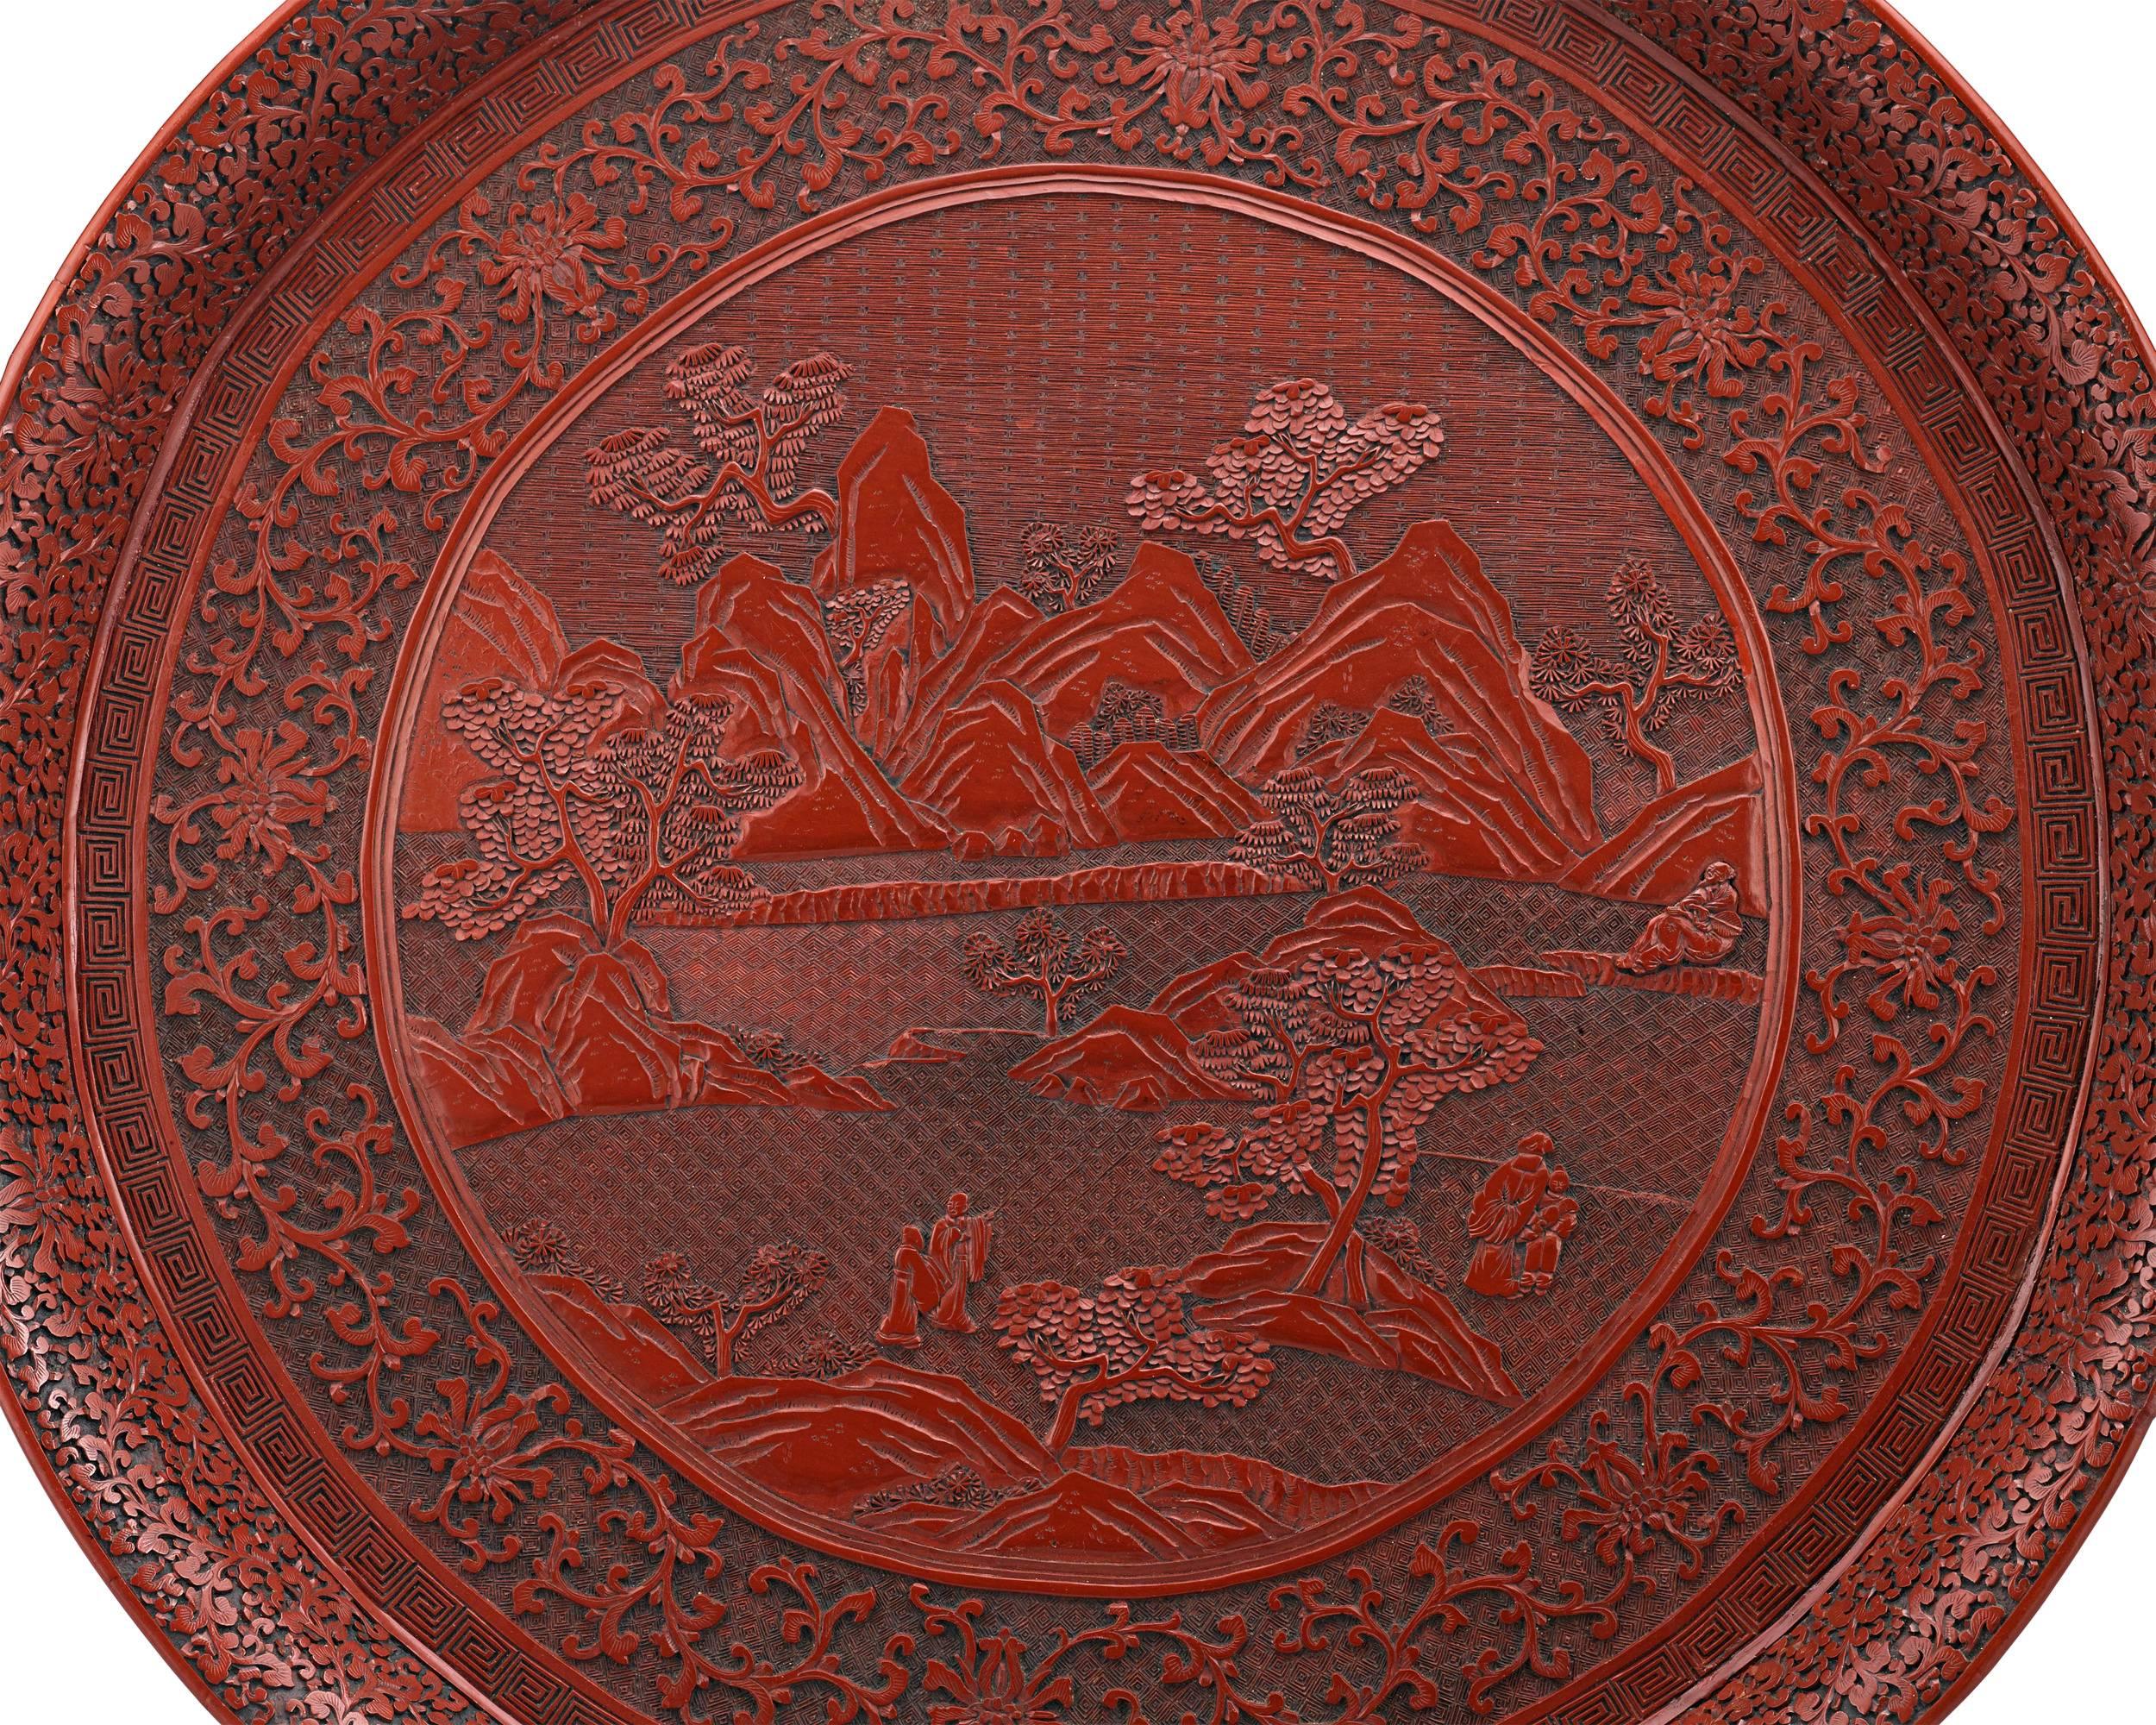 Exhibiting the highest level of detail, this extraordinary 18th-century tray is masterfully crafted from cinnabar lacquer in the ancient Chinese tradition. Enveloped in intricately carved and incised decorative motifs, the tray boasts the sculptural